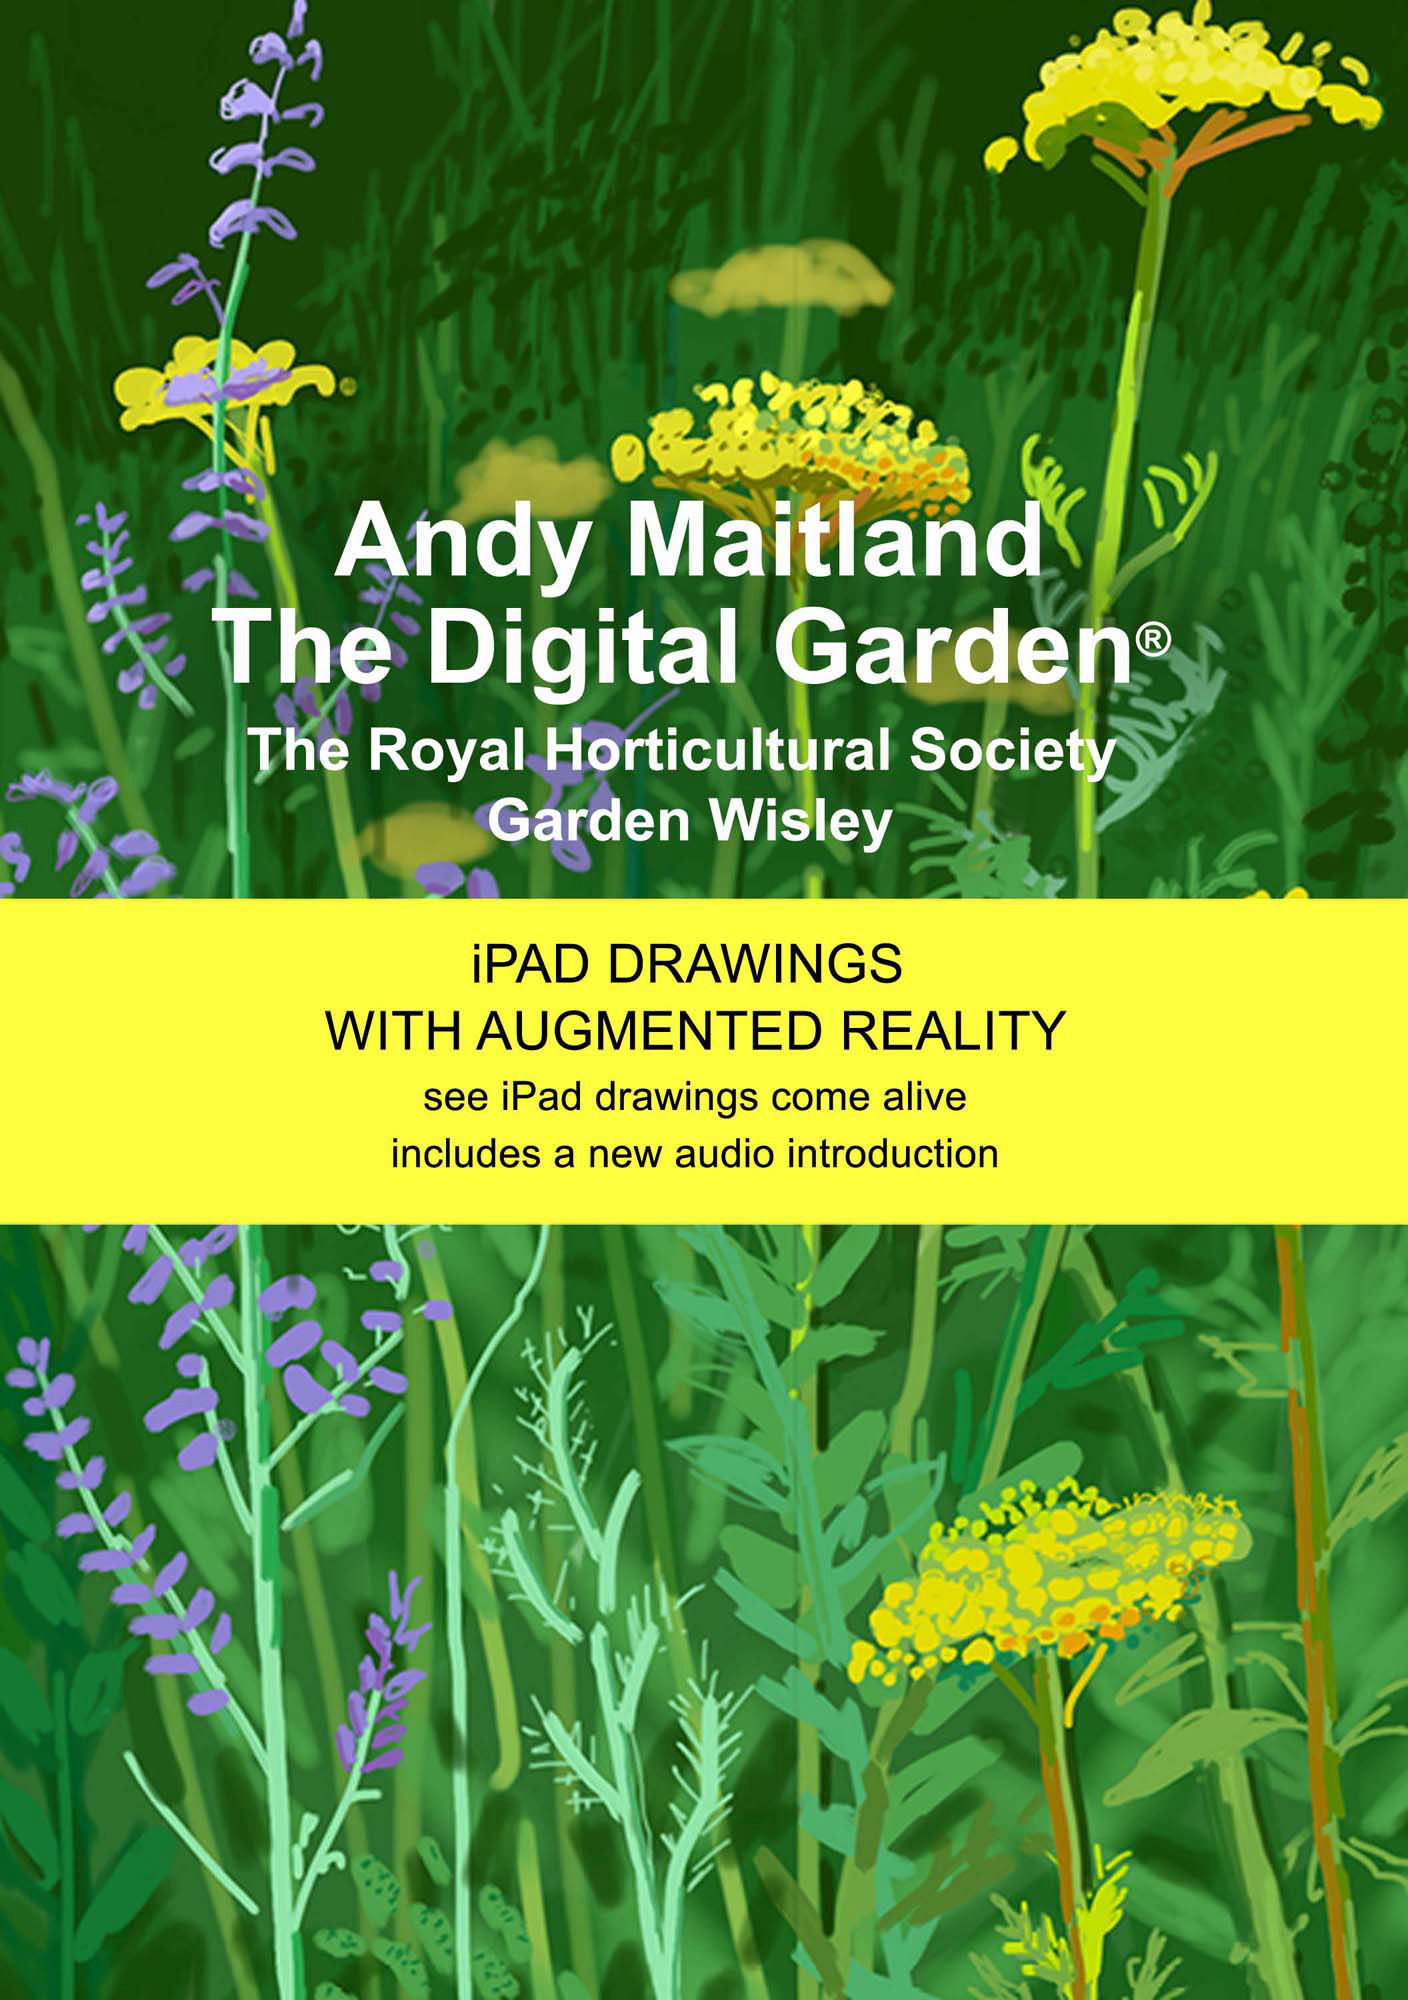 A new instant view online digital edition of ‘The Digital Garden® 2018, iPad drawings with Augmented Reality (AR) at the Royal Horticultural Society Garden Wisley’. English and French translations.